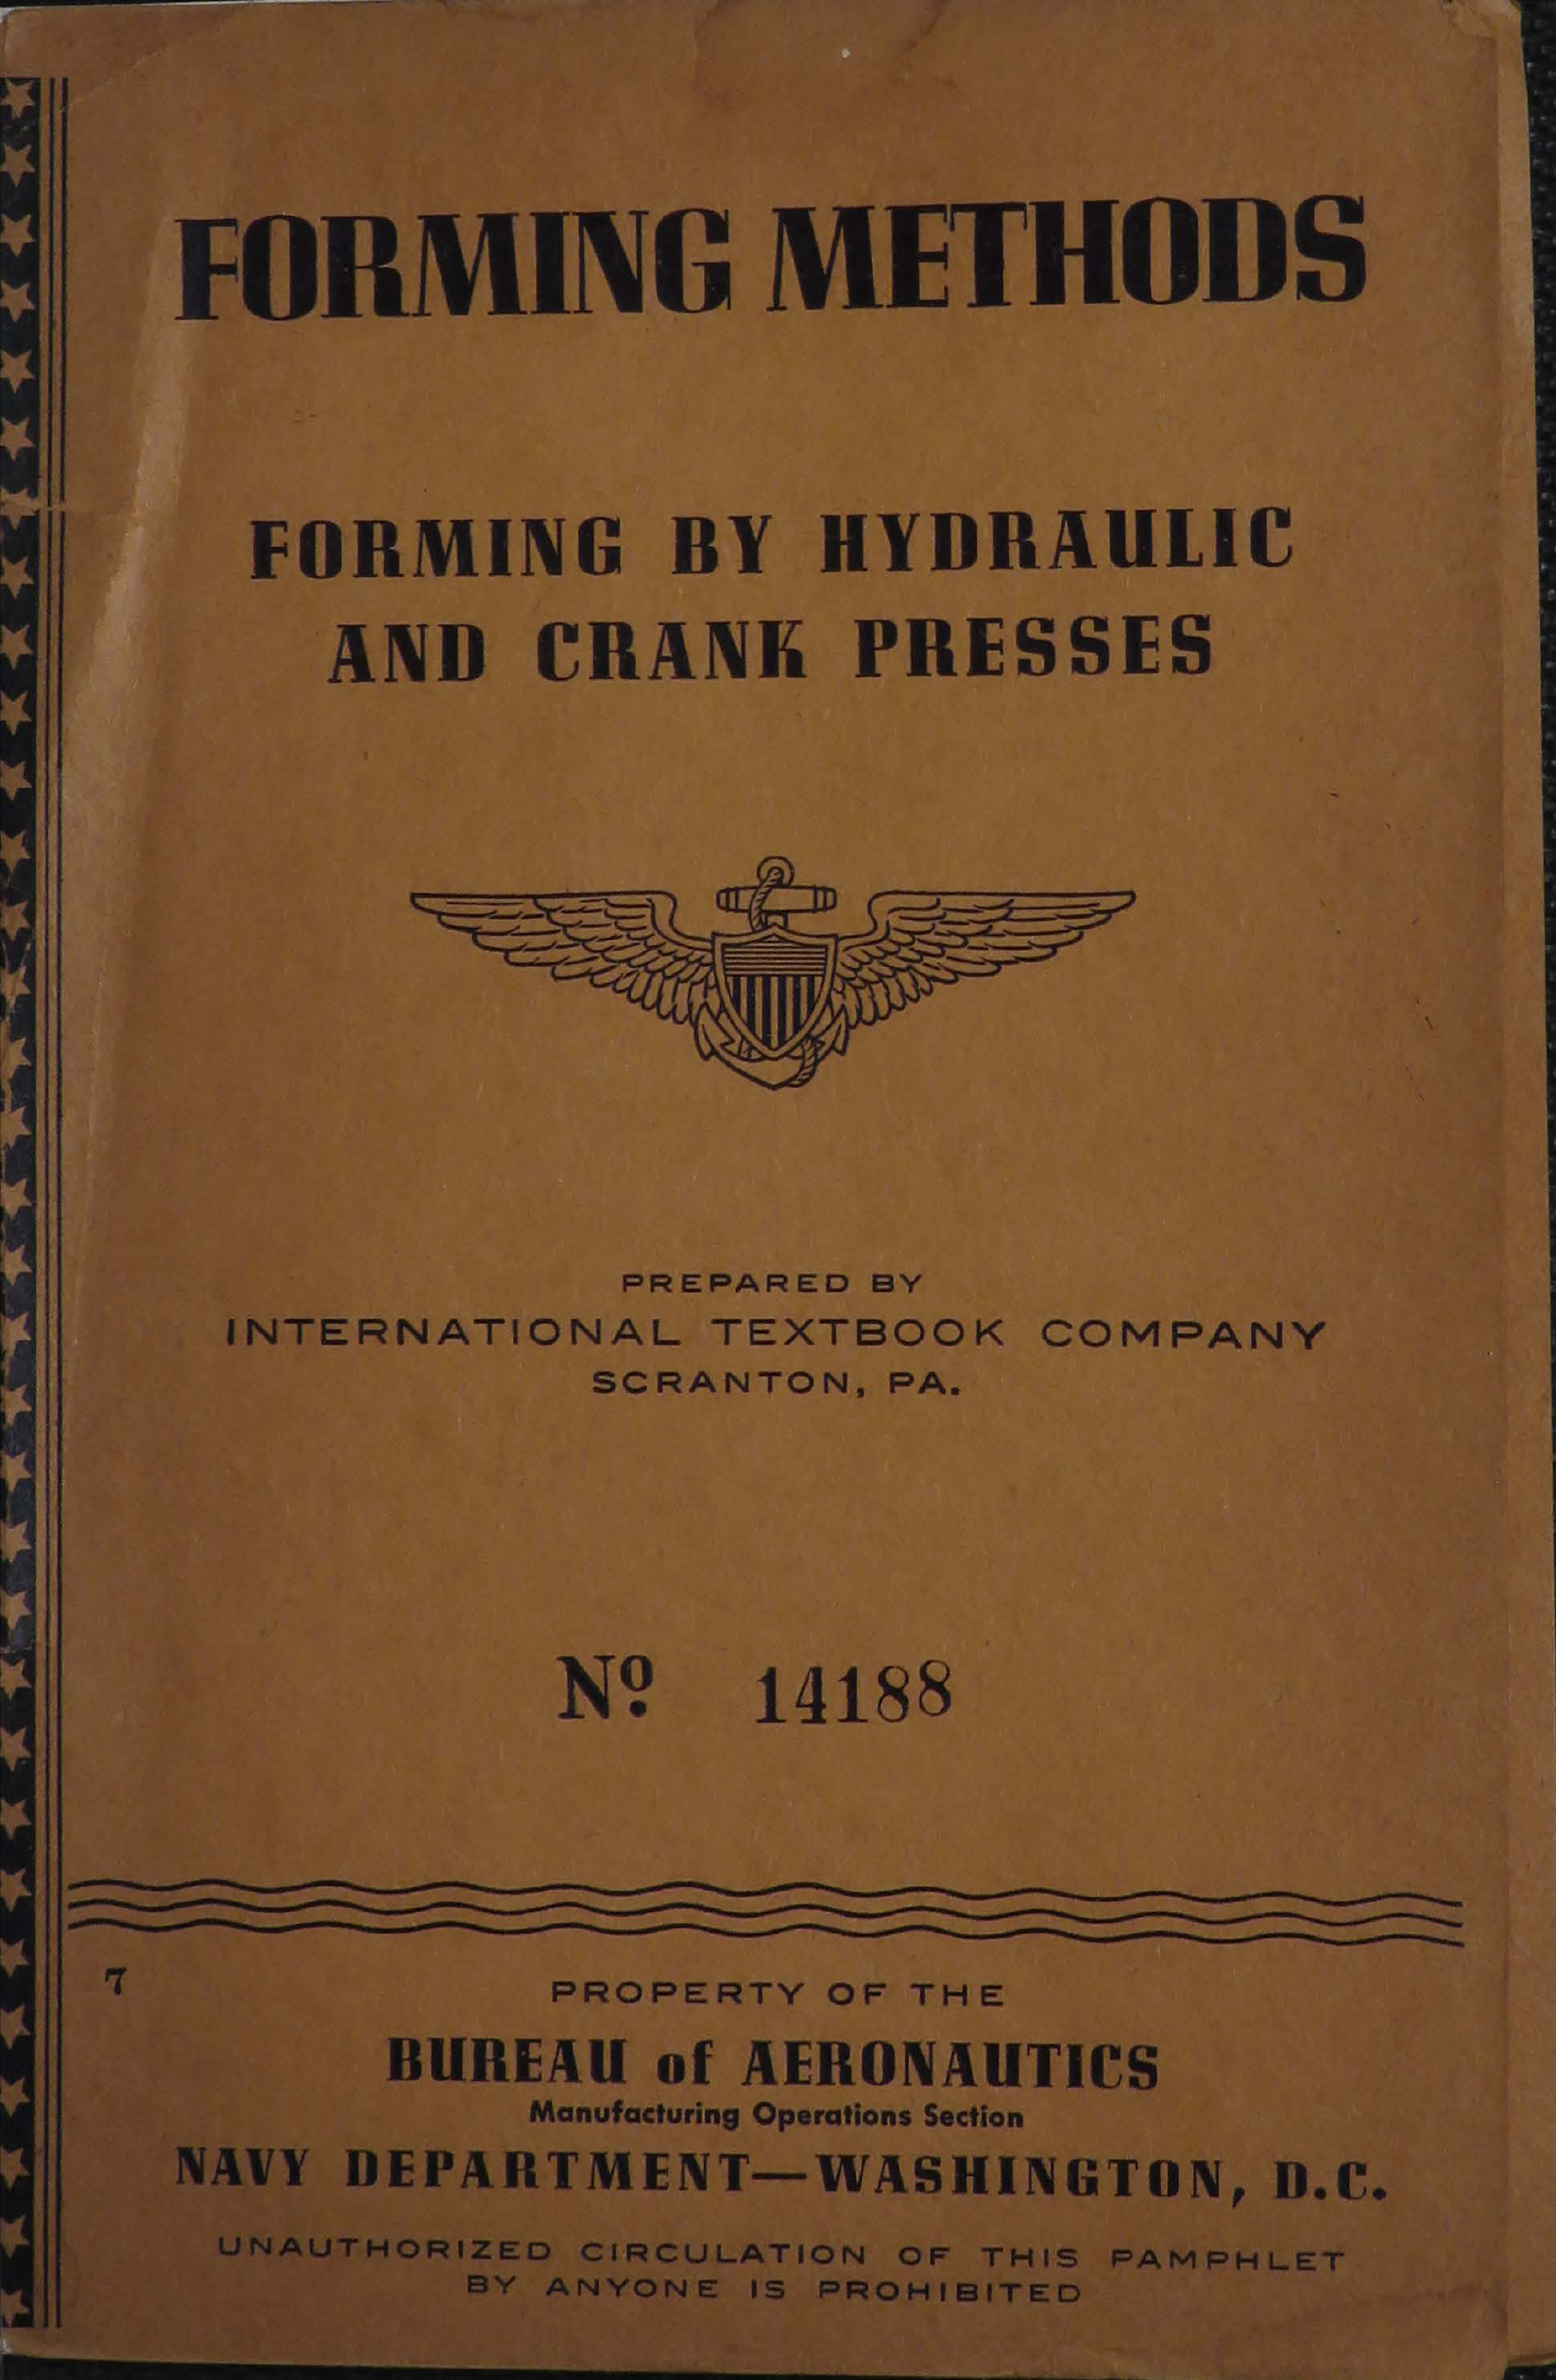 Sample page 1 from AirCorps Library document: Forming Methods - Forming by Hydraulic and Crank Presses - Bureau of Aeronautics